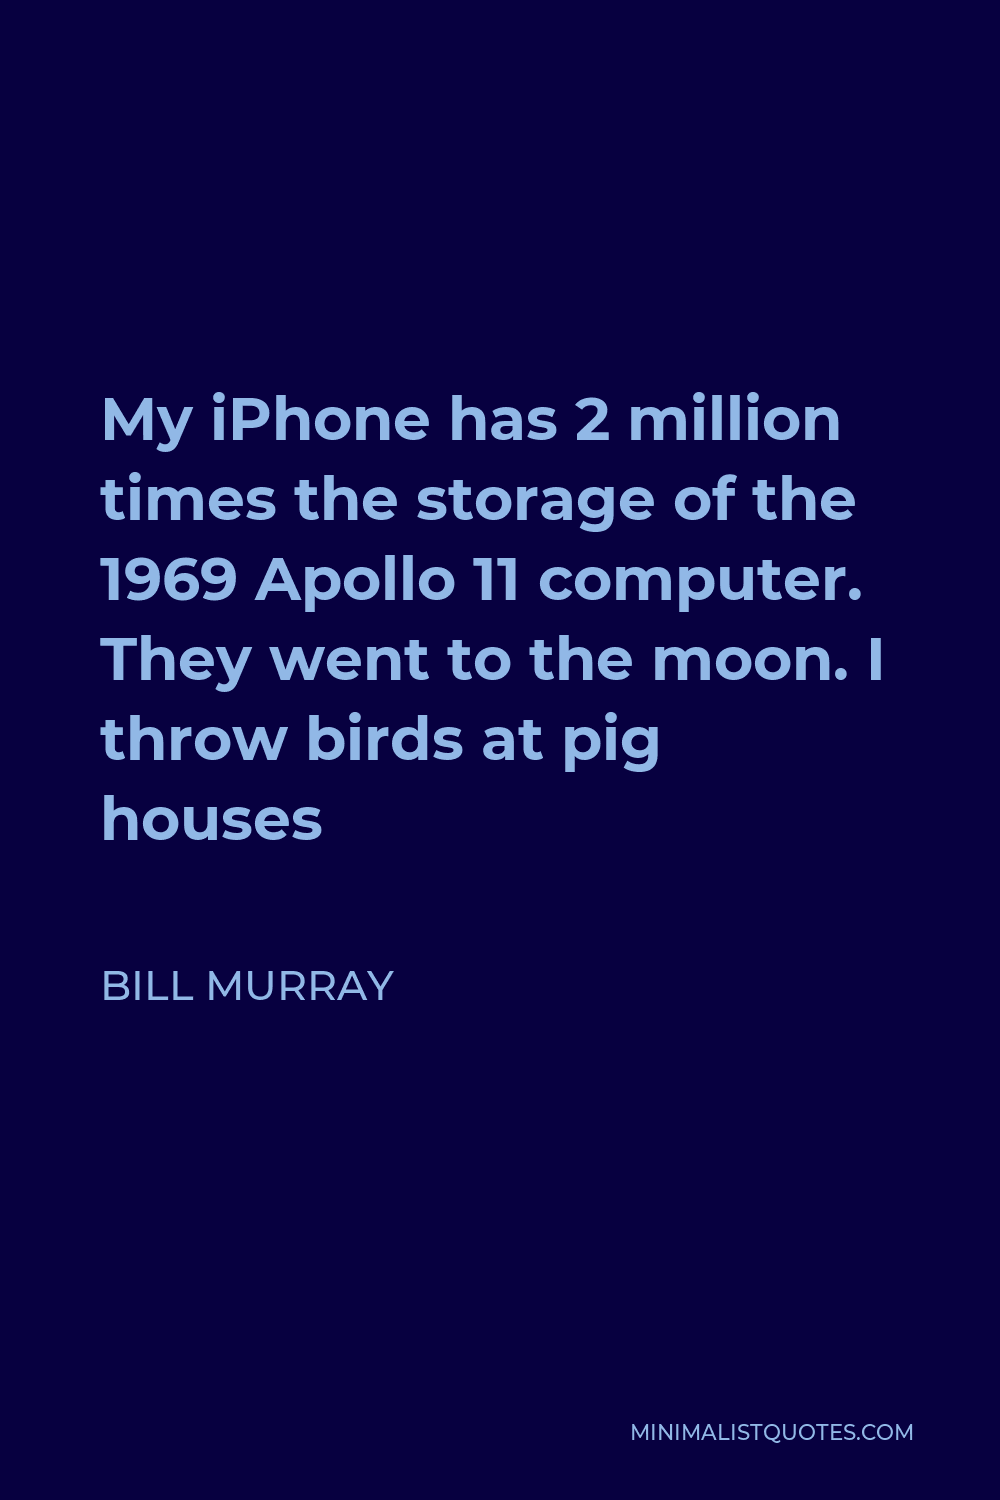 Bill Murray Quote - My iPhone has 2 million times the storage of the 1969 Apollo 11 computer. They went to the moon. I throw birds at pig houses